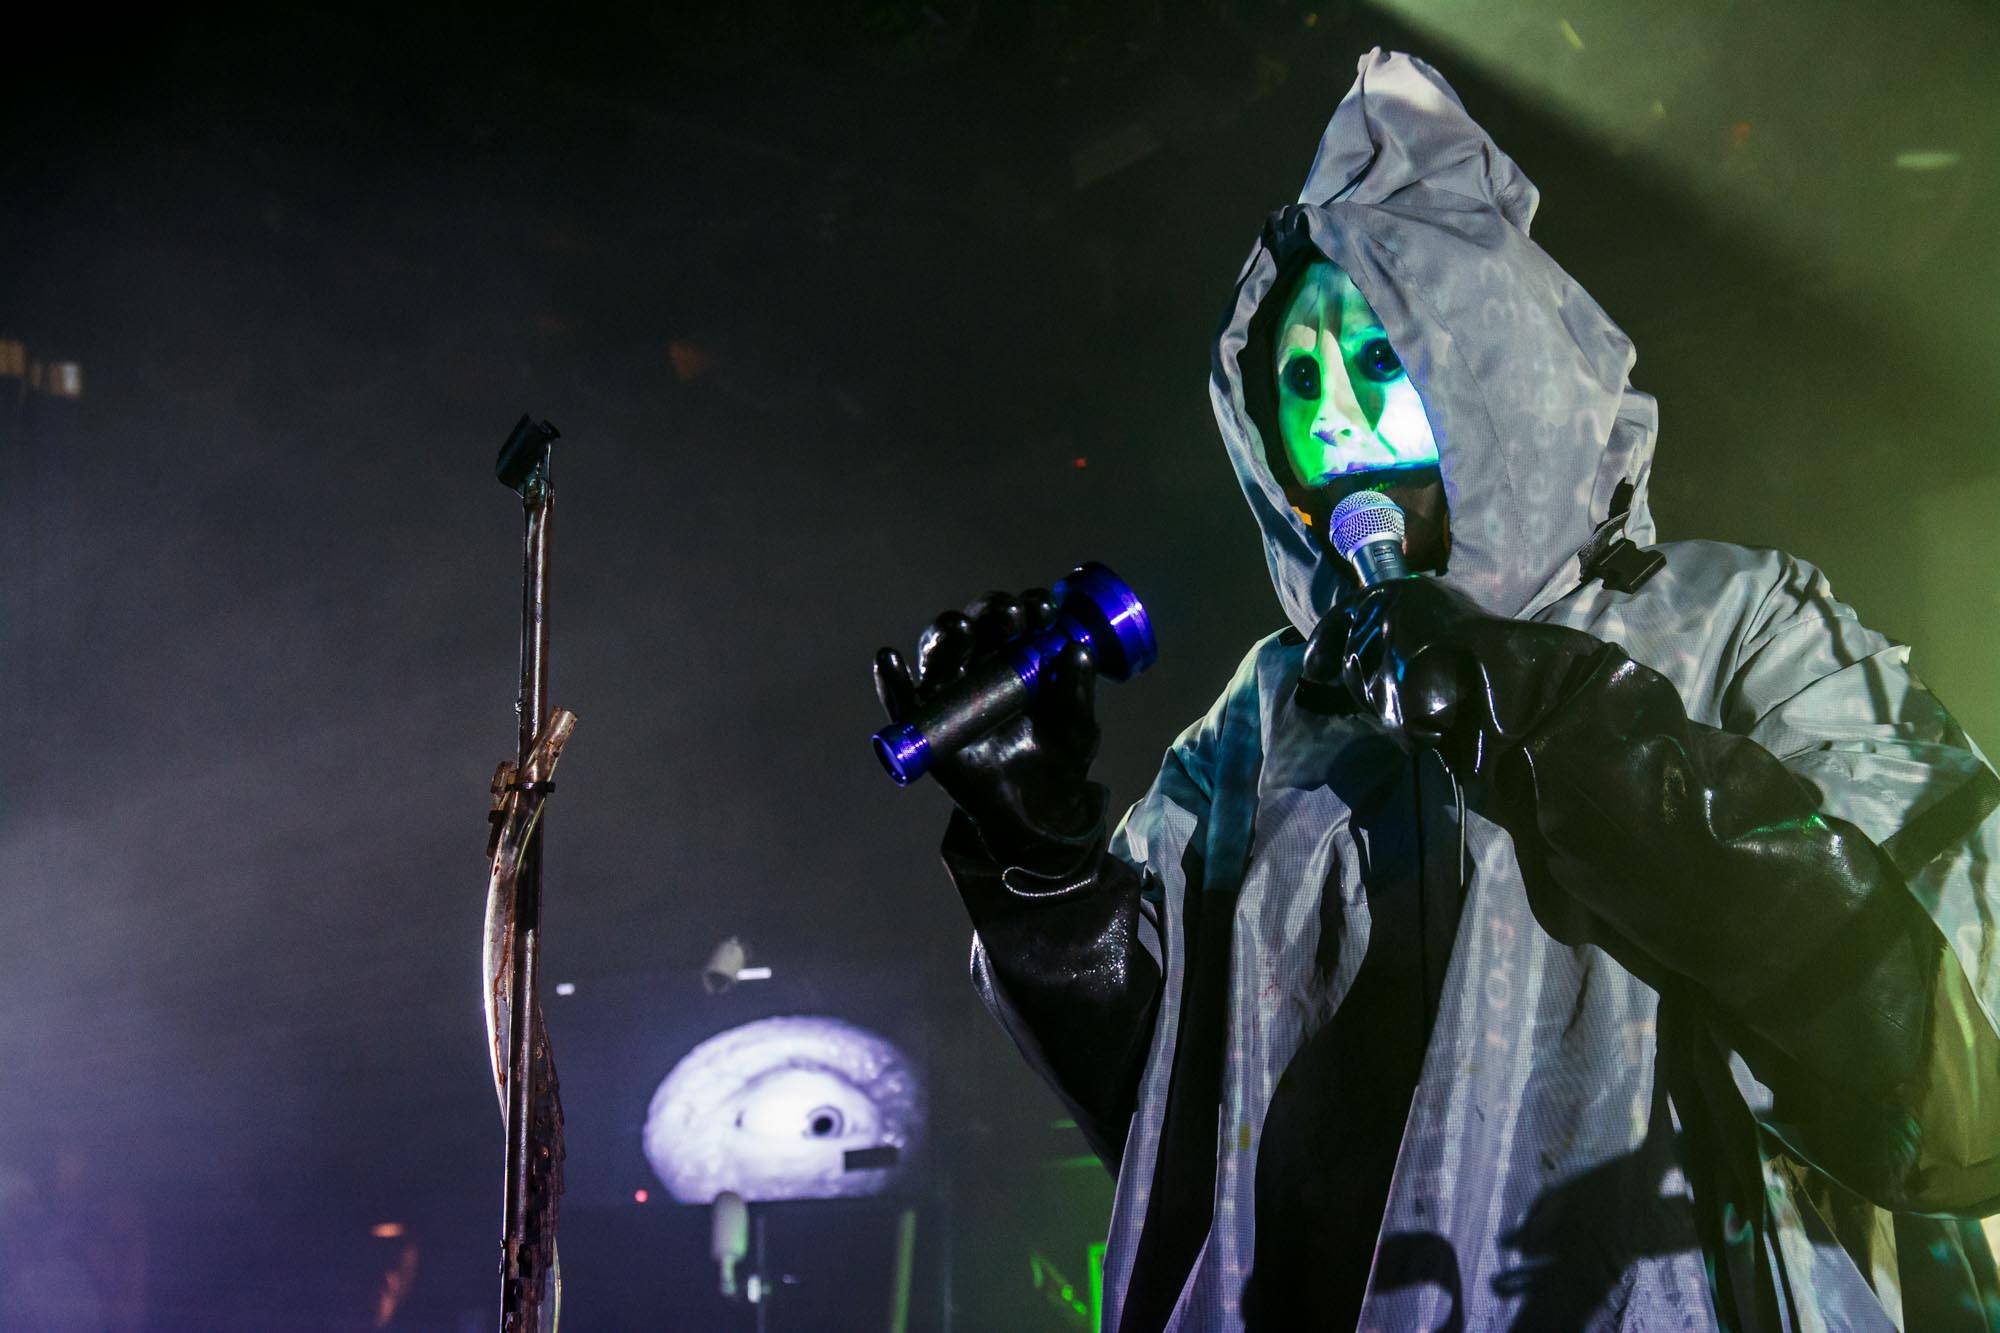 Skinny Puppy at the Commodore Ballroom - The Snipe News